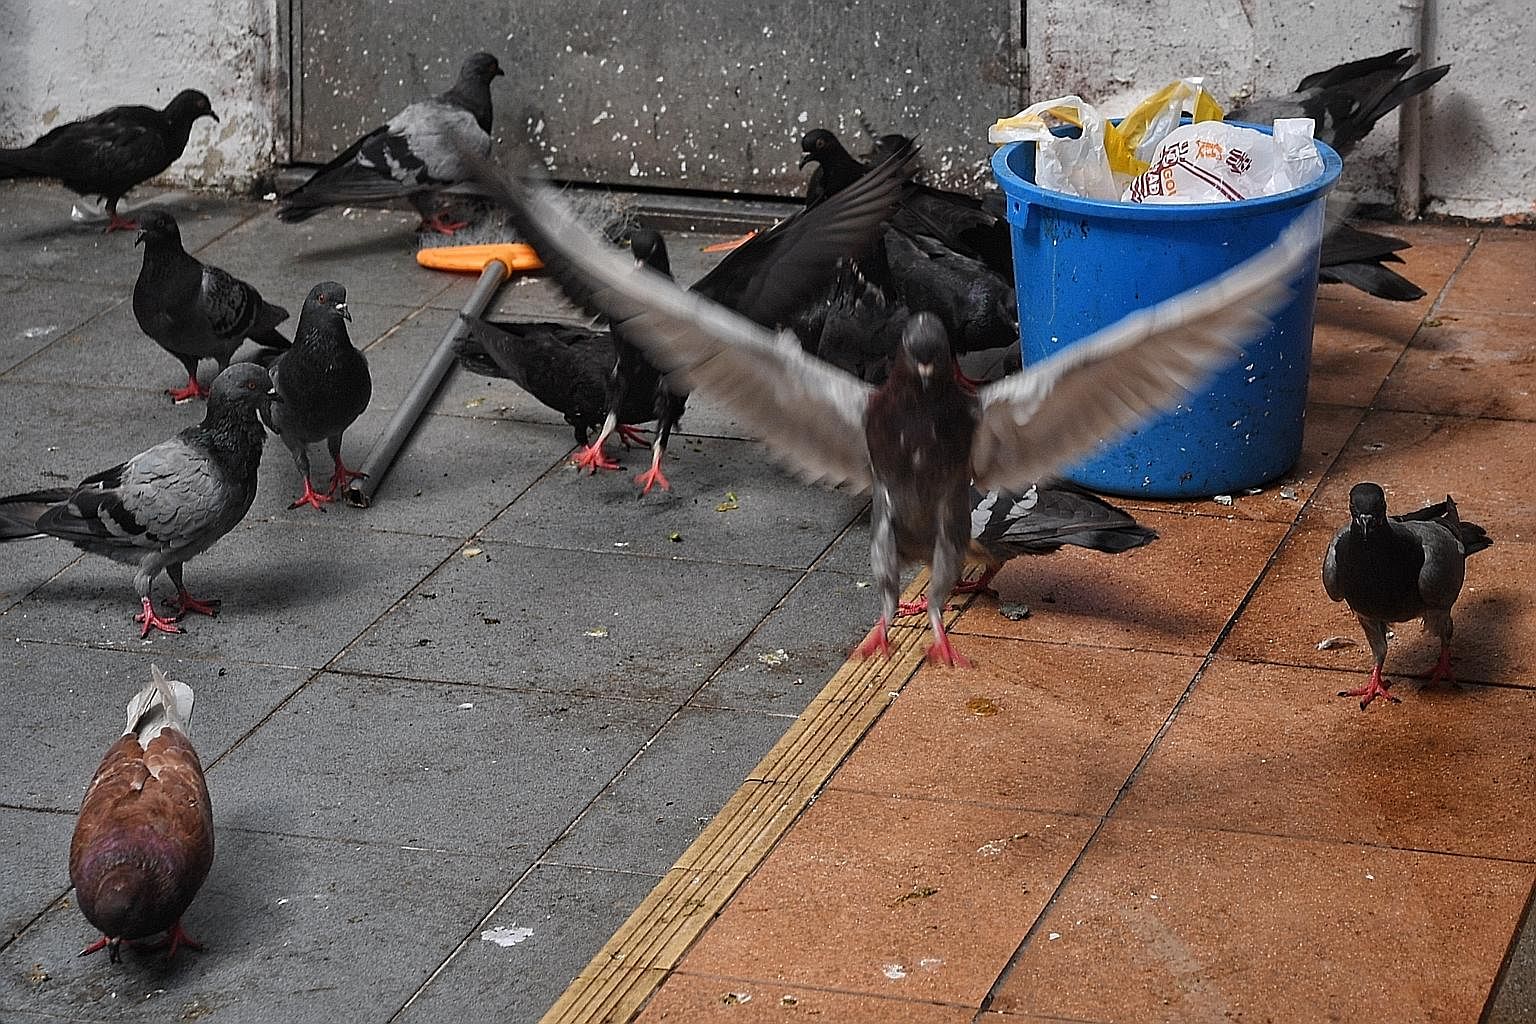 Birds feeding from a pail of trash below a block of flats in Toa Payoh Central earlier this month. Cleaners doing manual waste collection from blocks in Bidadari earlier this month after the pneumatic system choked up due to improper waste disposal.